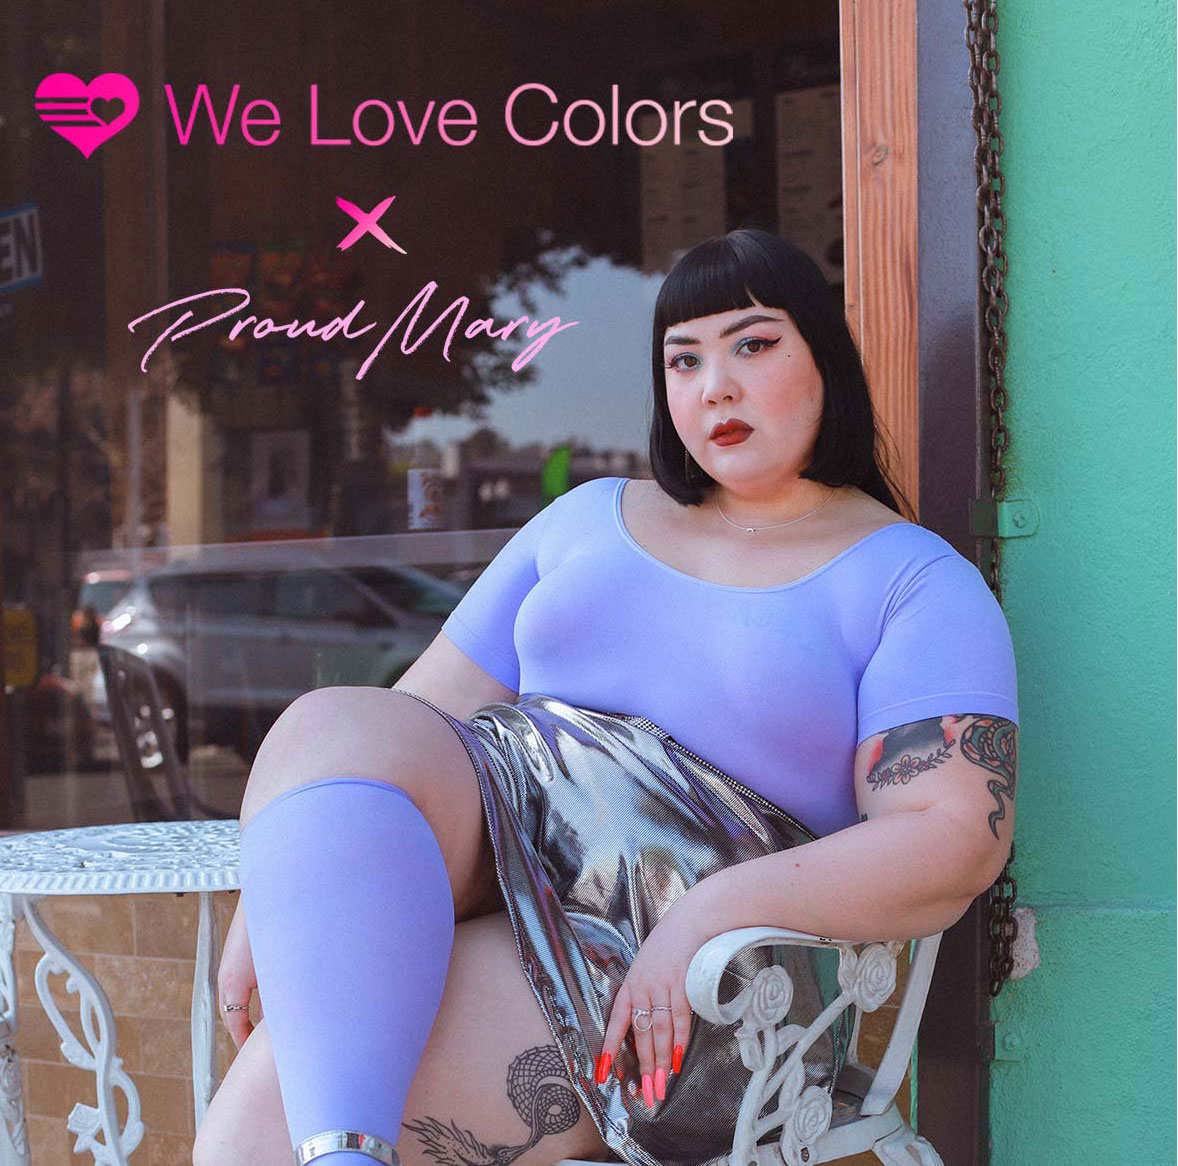 Plus Size Fashion Lookbook Welovecolors Proud Mary 11